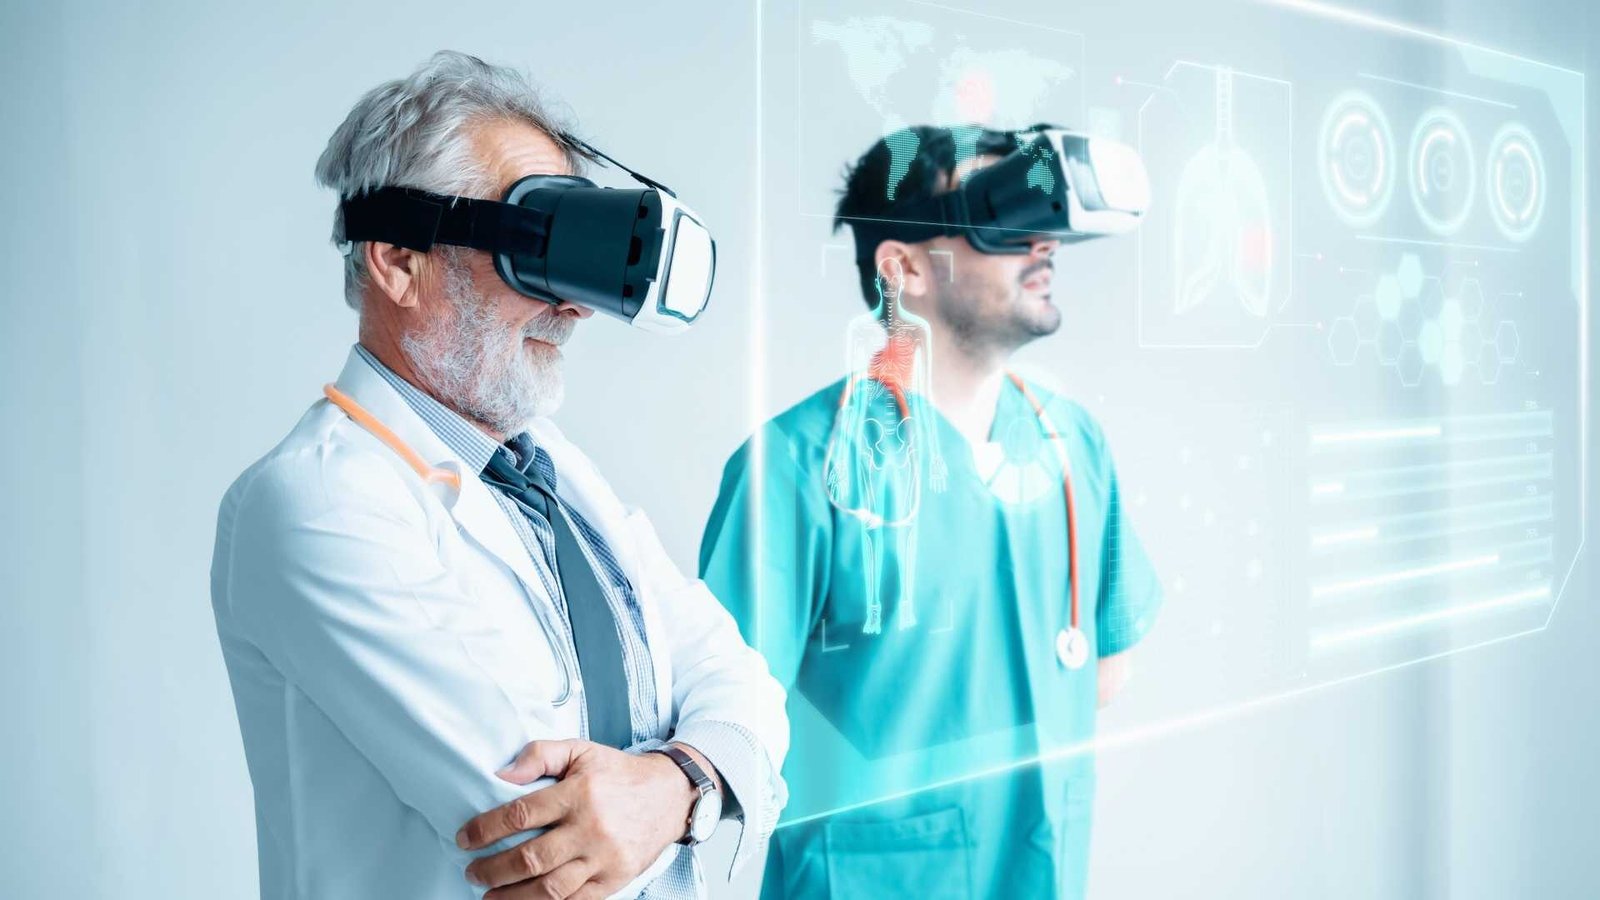 How do AR and VR technologies improve medical education?